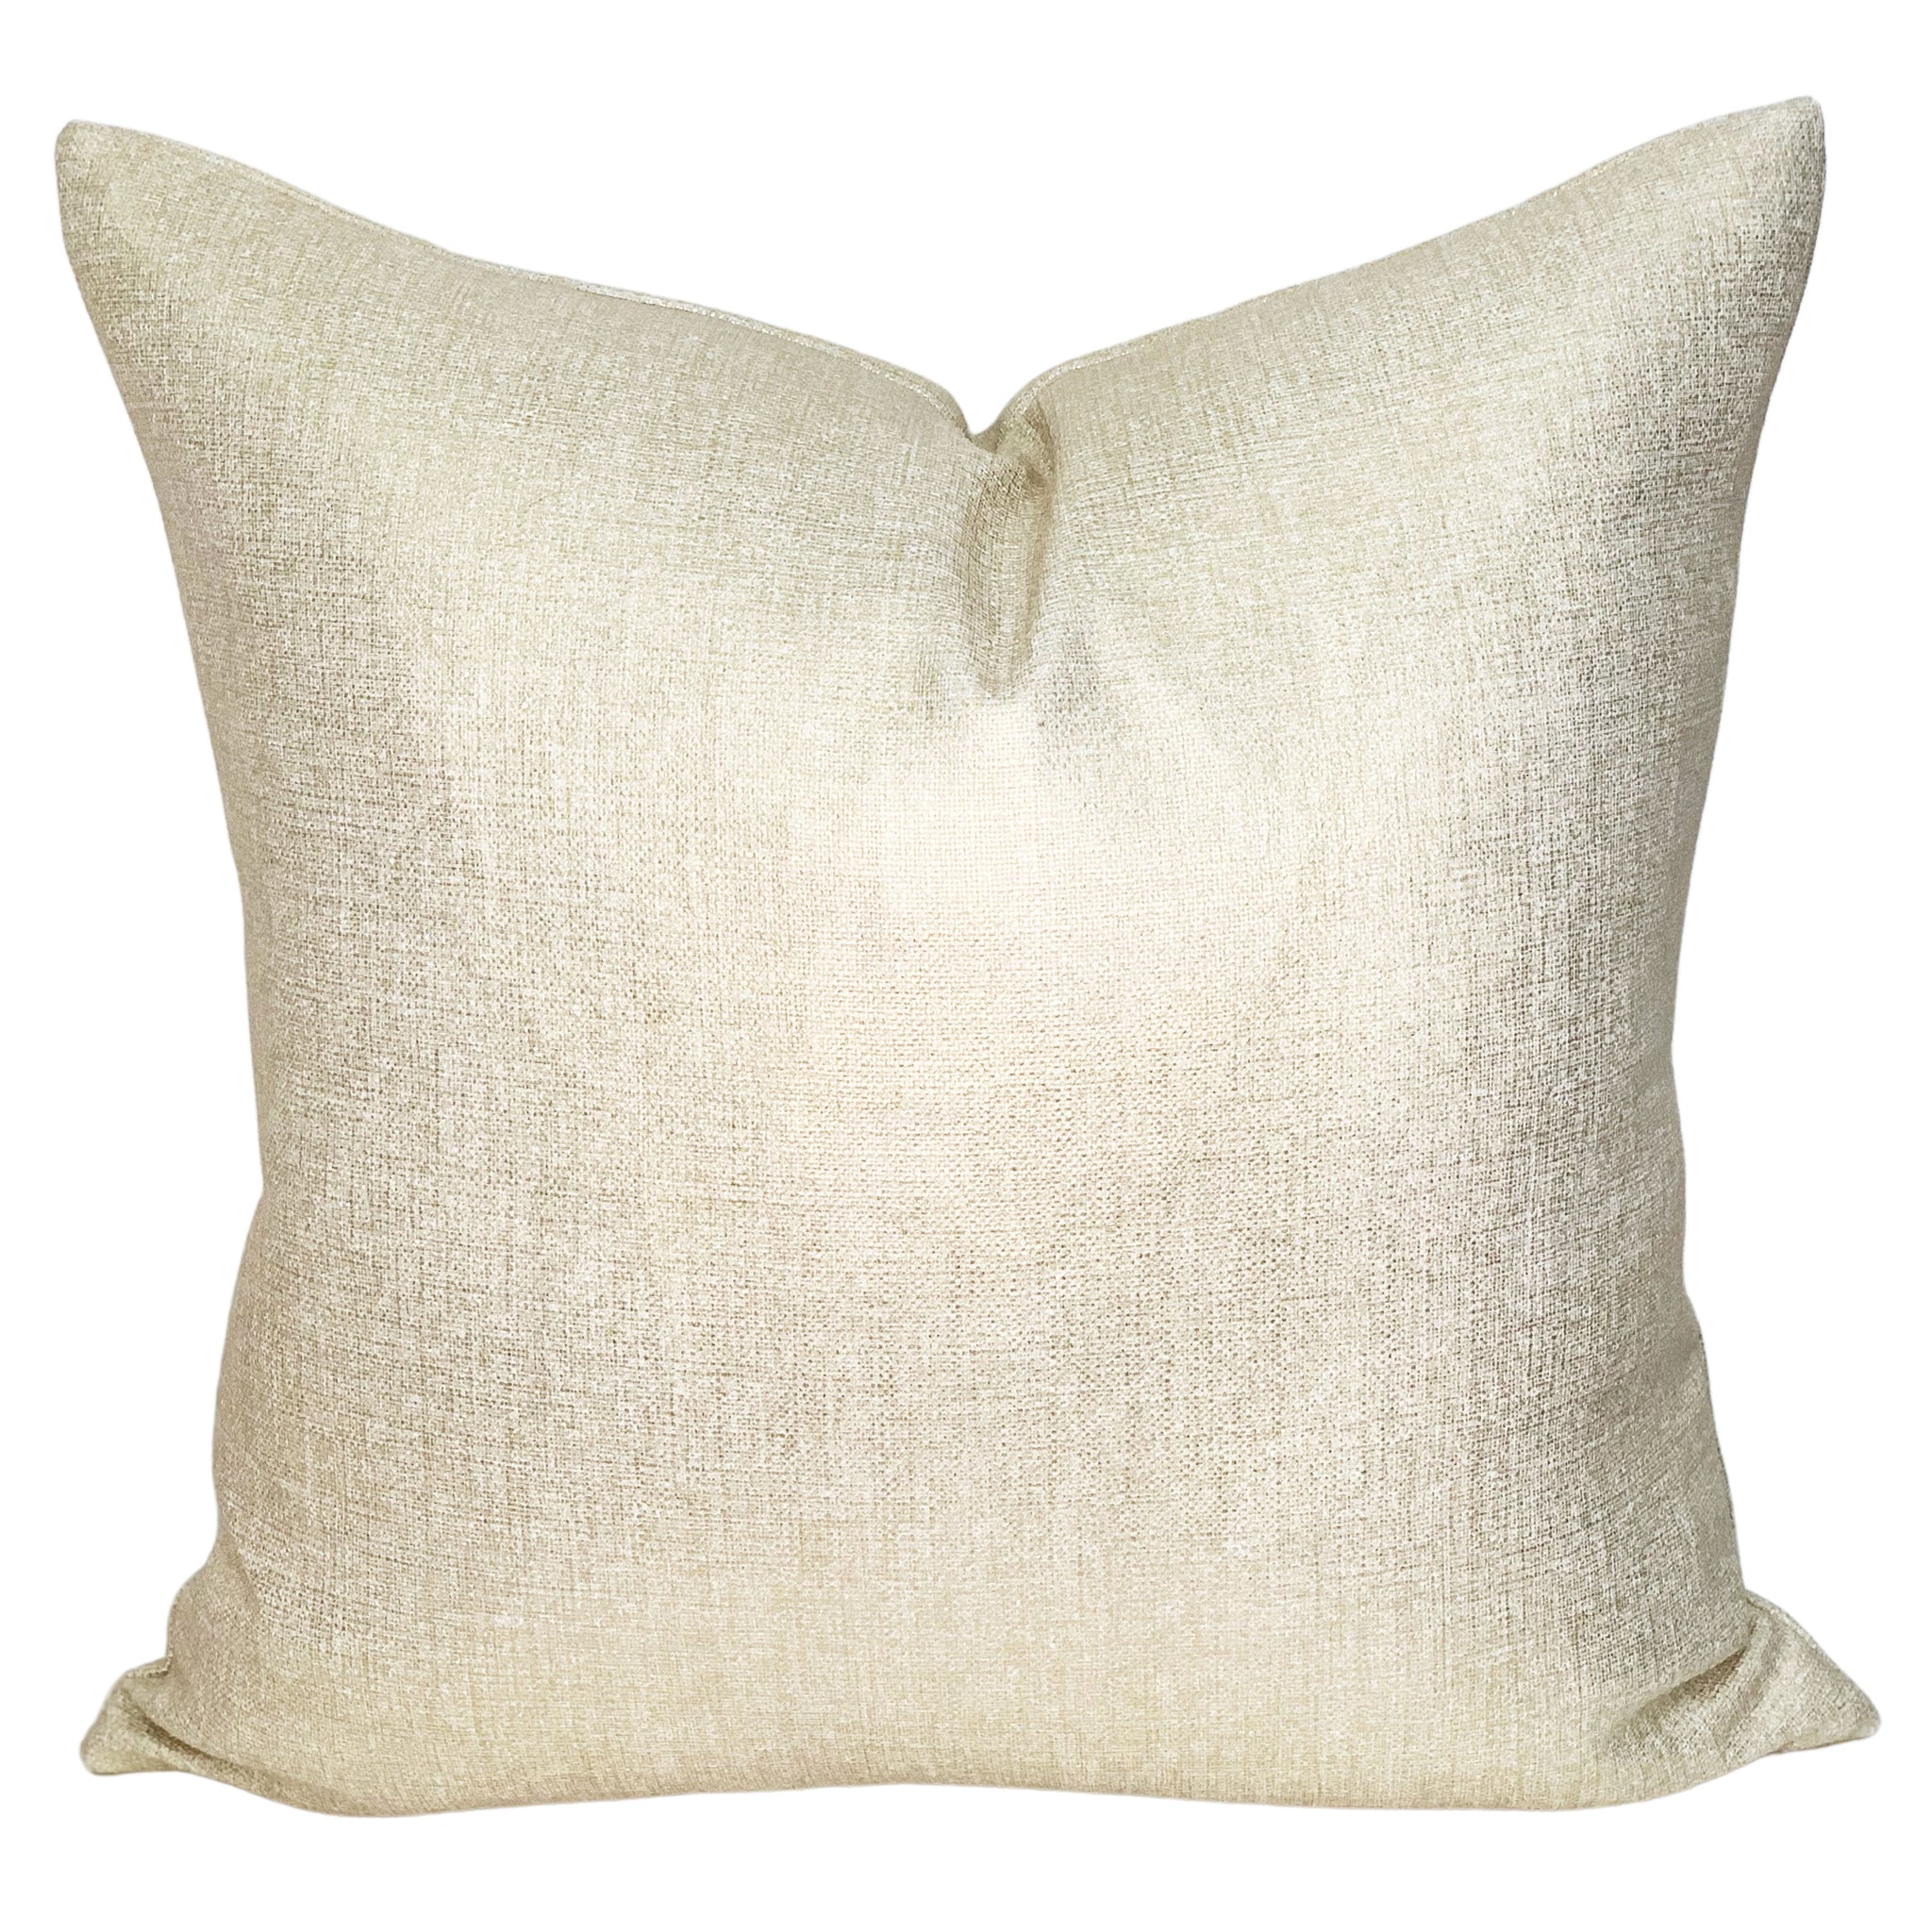 Queen Pillow Cover in Pearl